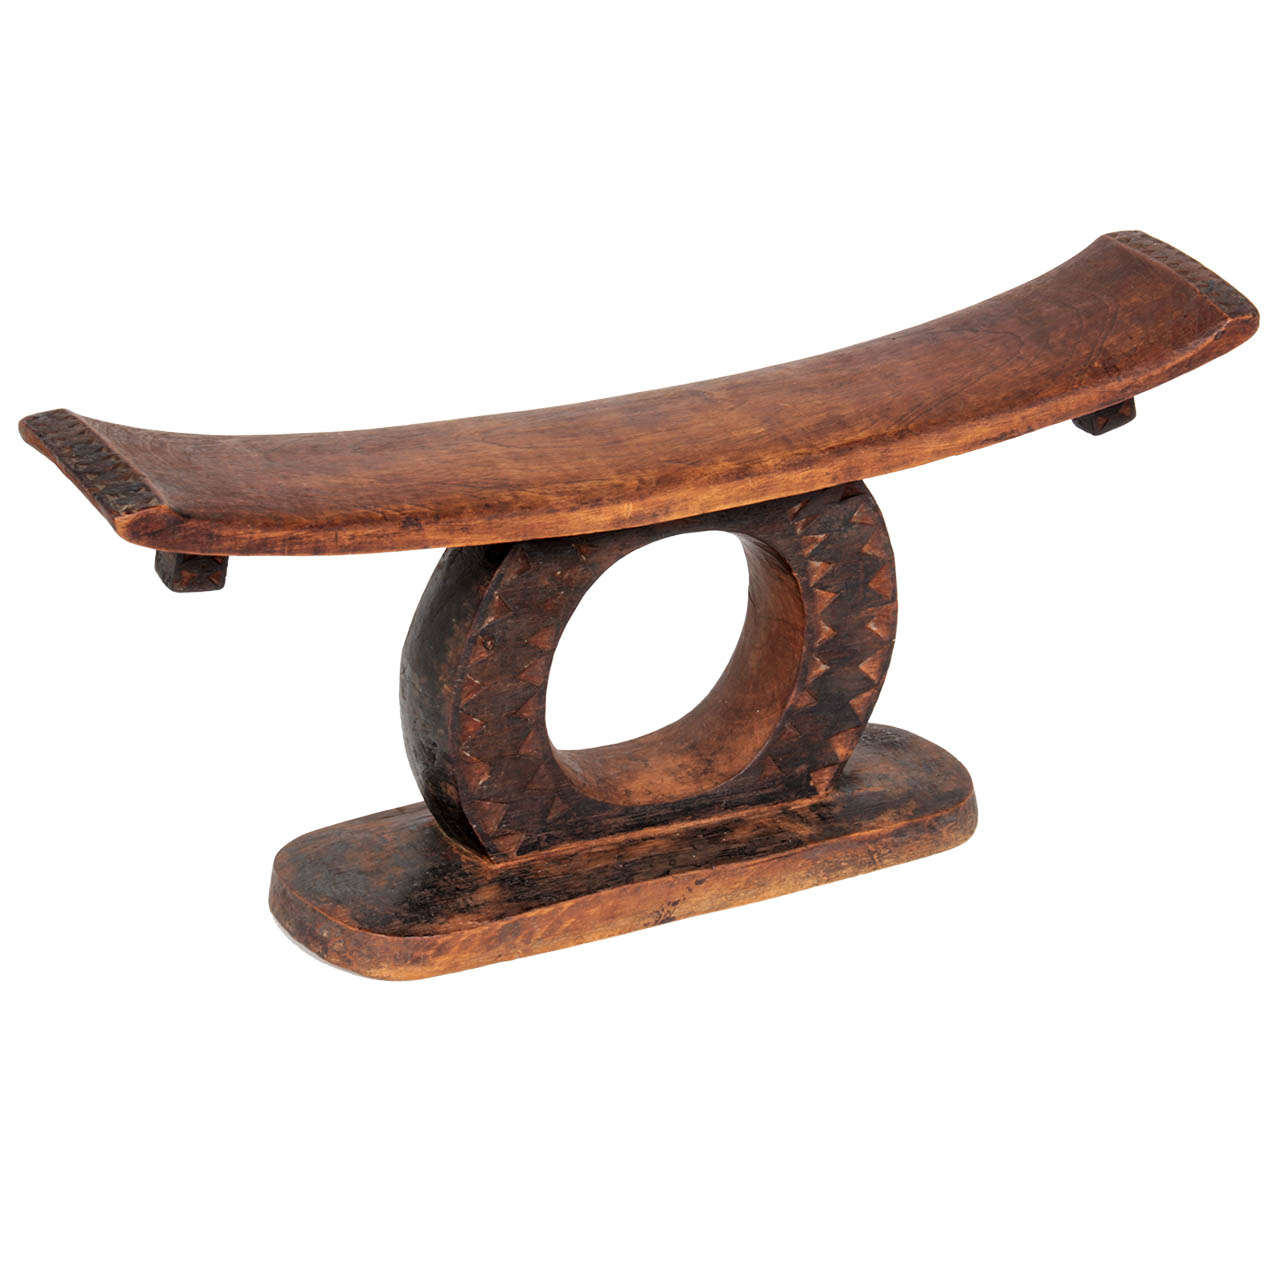 South African Tribal Zulu Art Deco Headrest Early to mid 20th Century For Sale